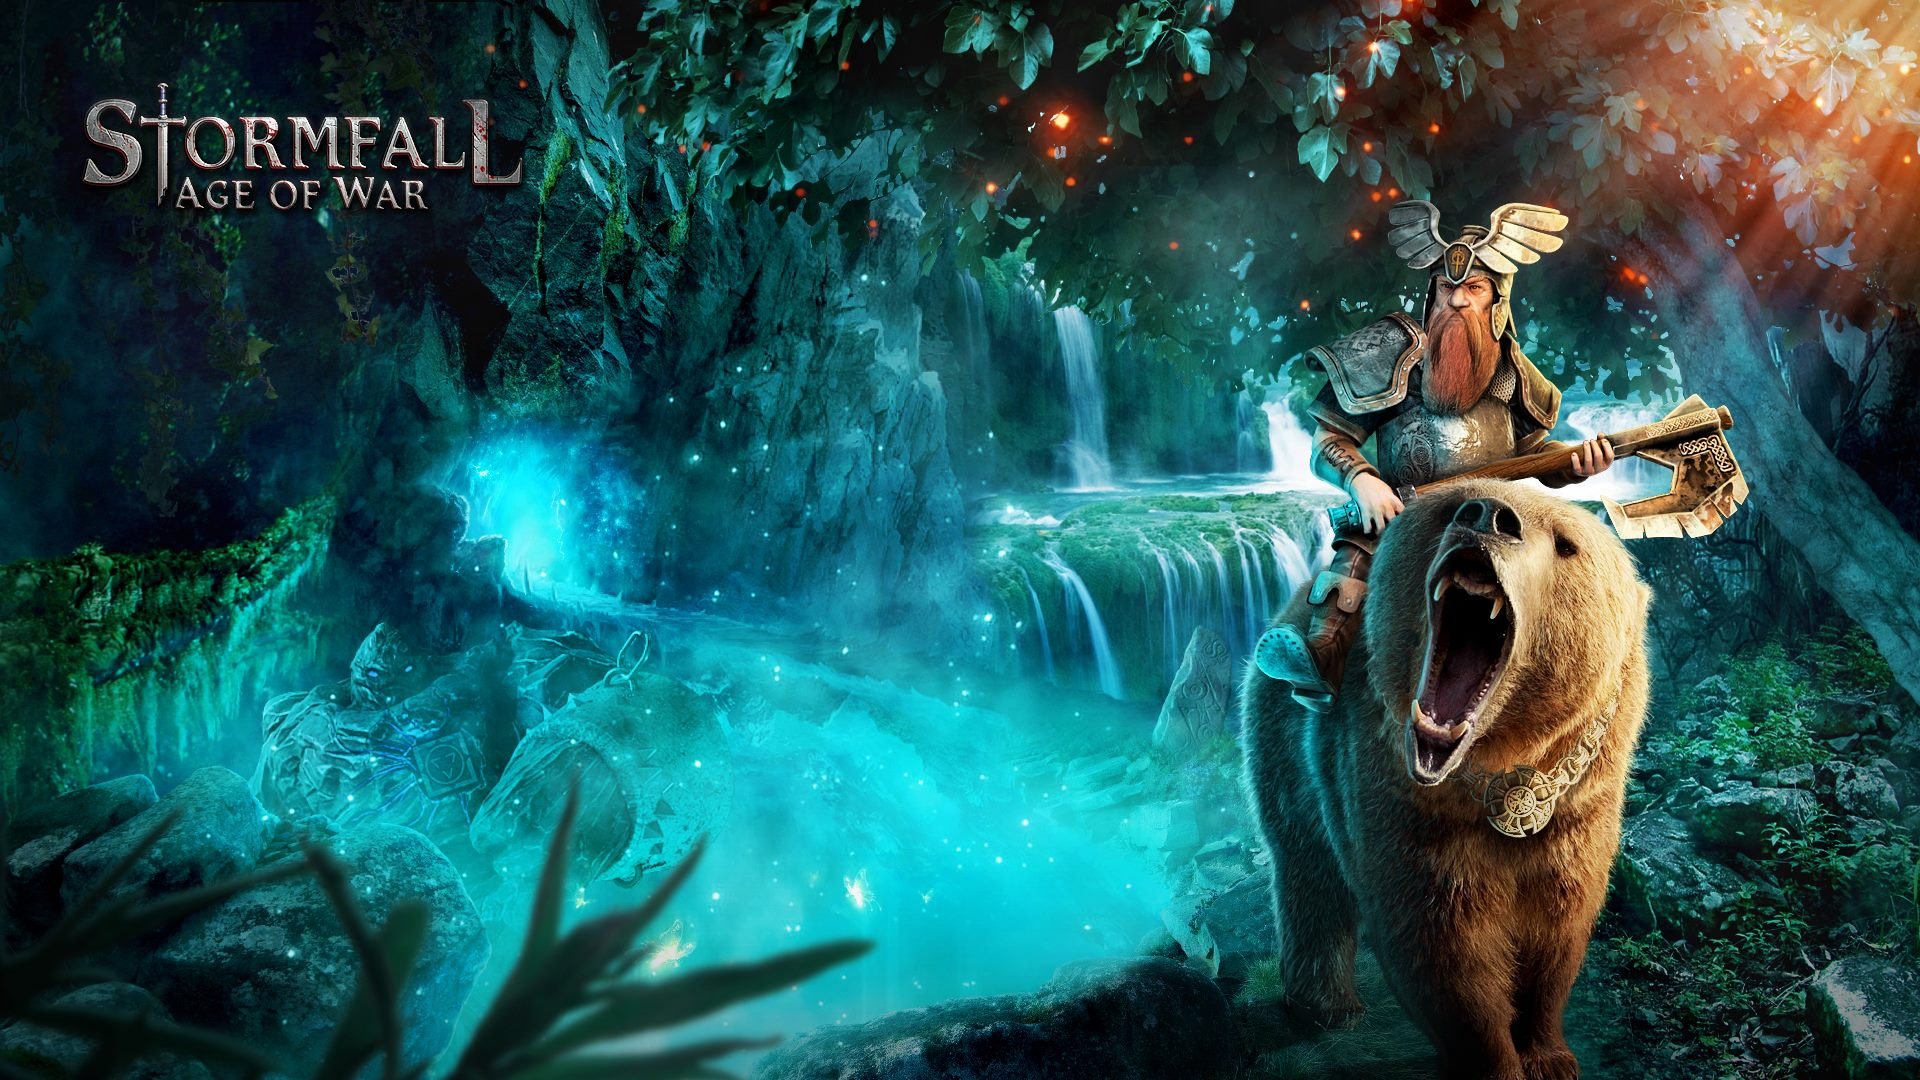 stormfall, Medieval, Online, Strategy, Fantasy, Fighting, Action, 1sfall, Mmo, Rts, Warrior Wallpaper